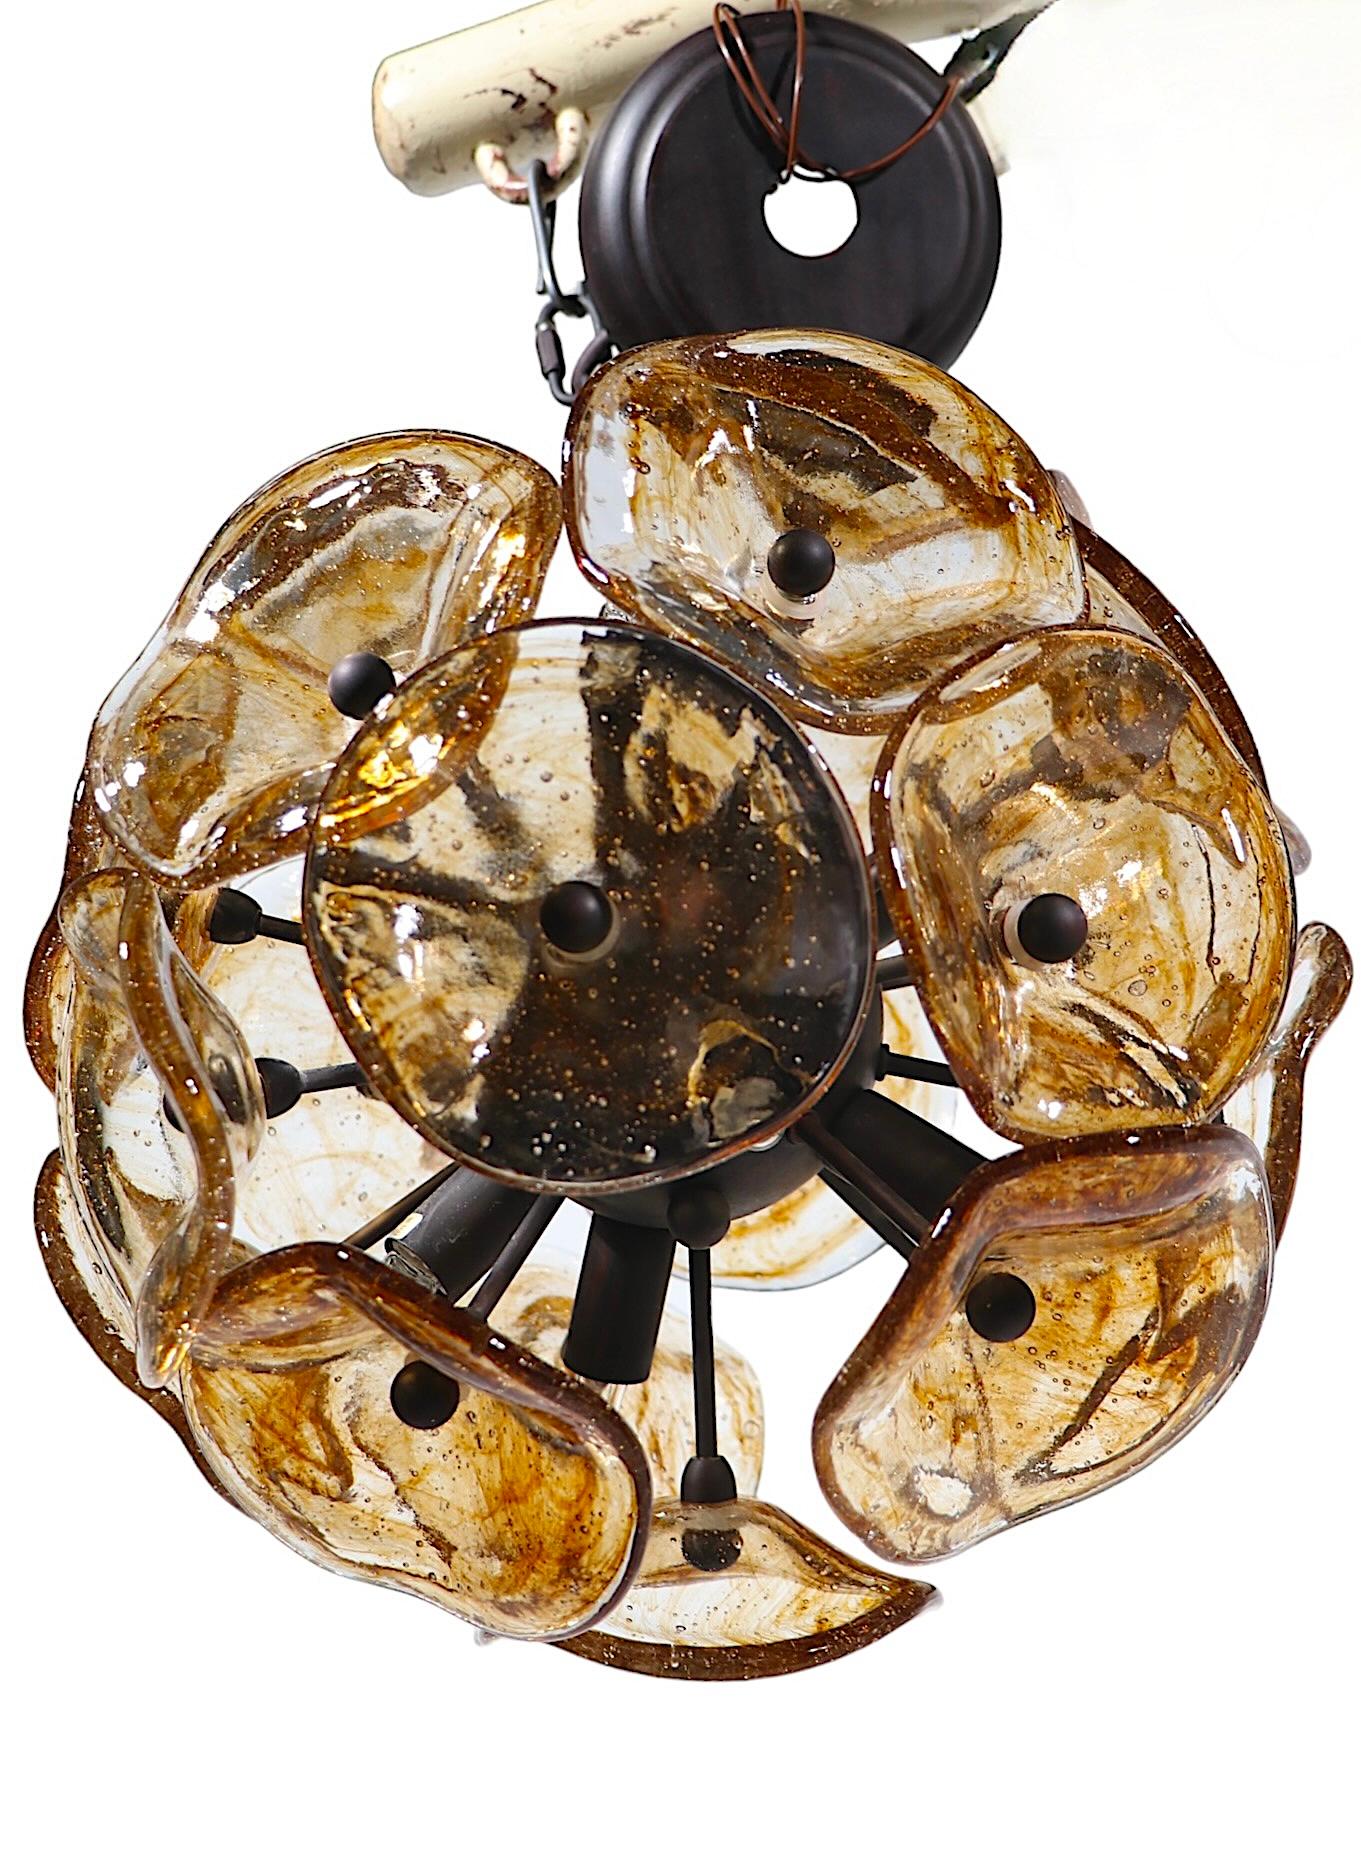 Post Modern Chandelier with Murano Glass Flowers by Fiori c 1990 -2010 For Sale 2